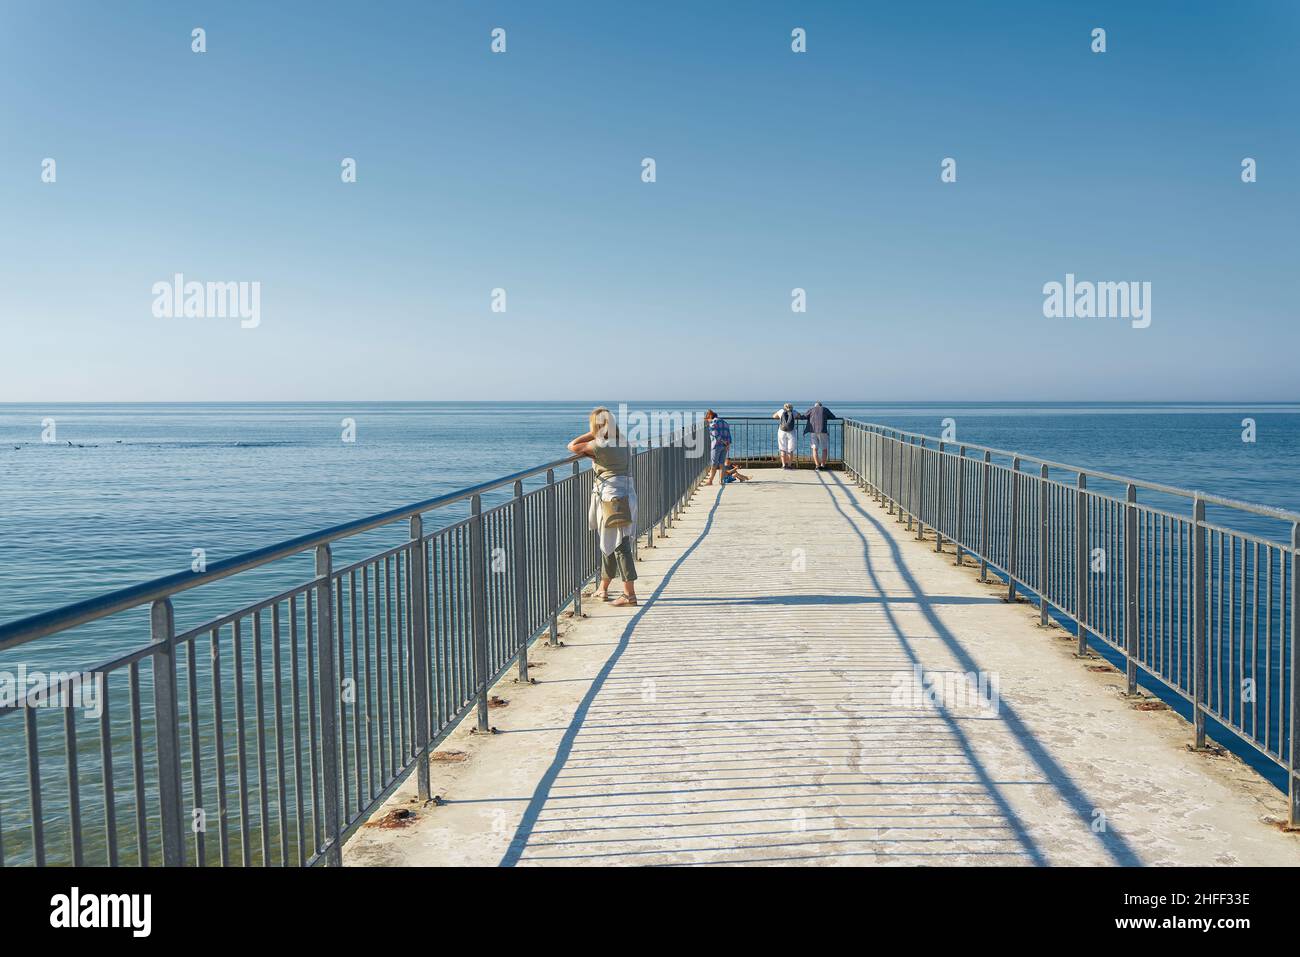 Holidaymakers on the small pier (Male Molo) on the beach of Kolobrzeg on the Polish coast of the Baltic Sea Stock Photo